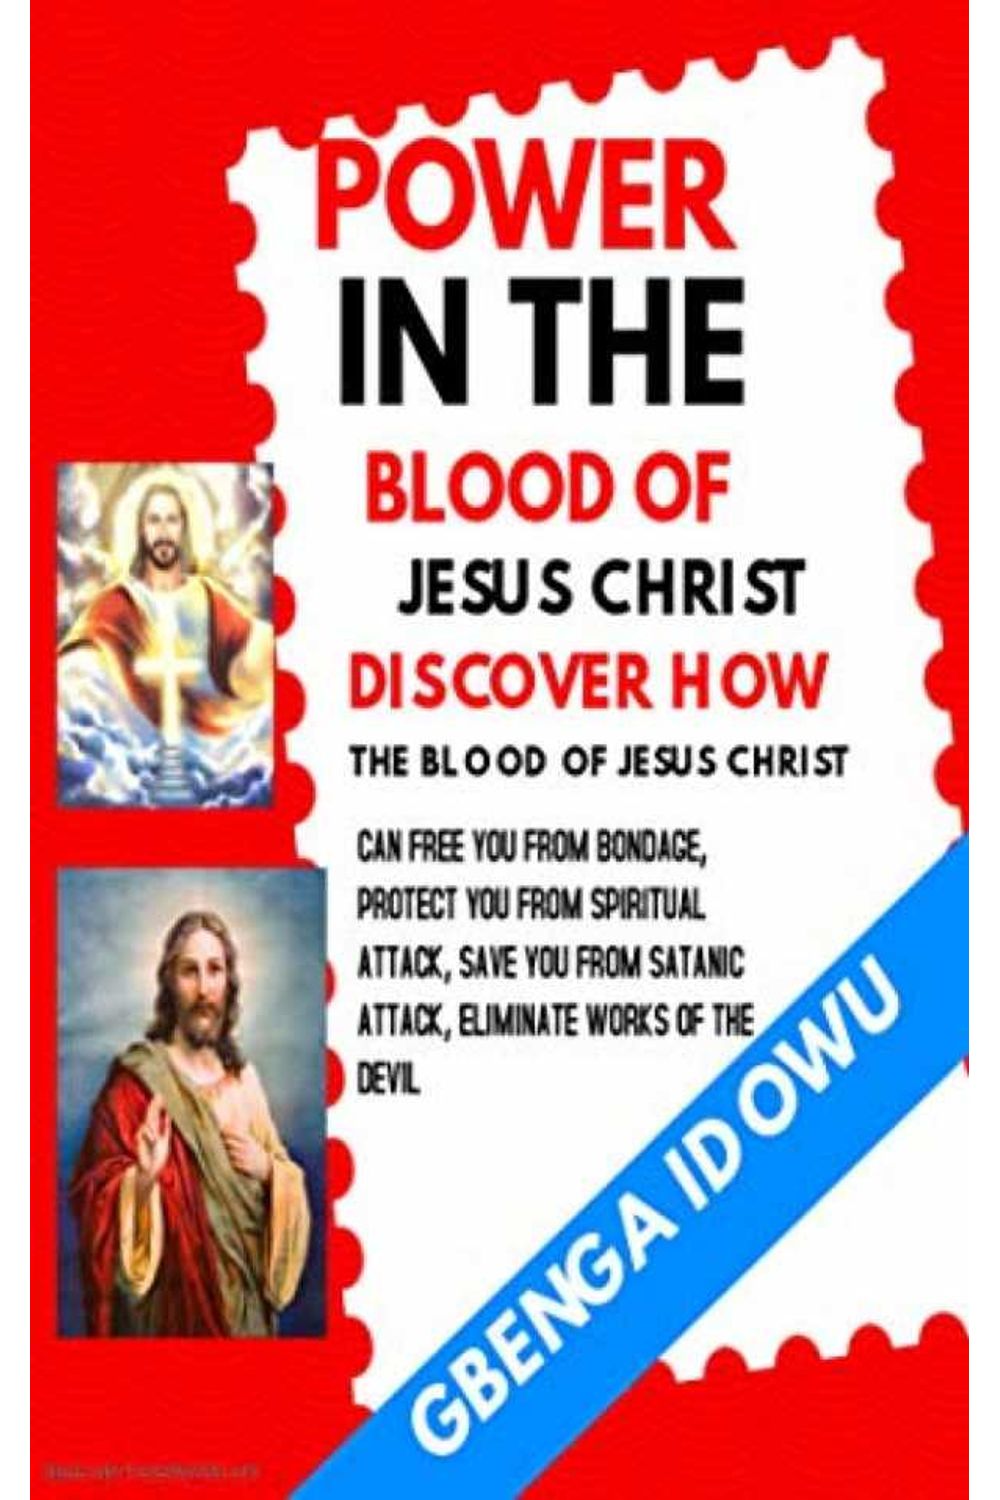 bw-power-in-the-blood-of-jesus-christ-discover-how-the-blood-of-jesus-christ-can-free-you-from-bondage-bookrix-9783748716112